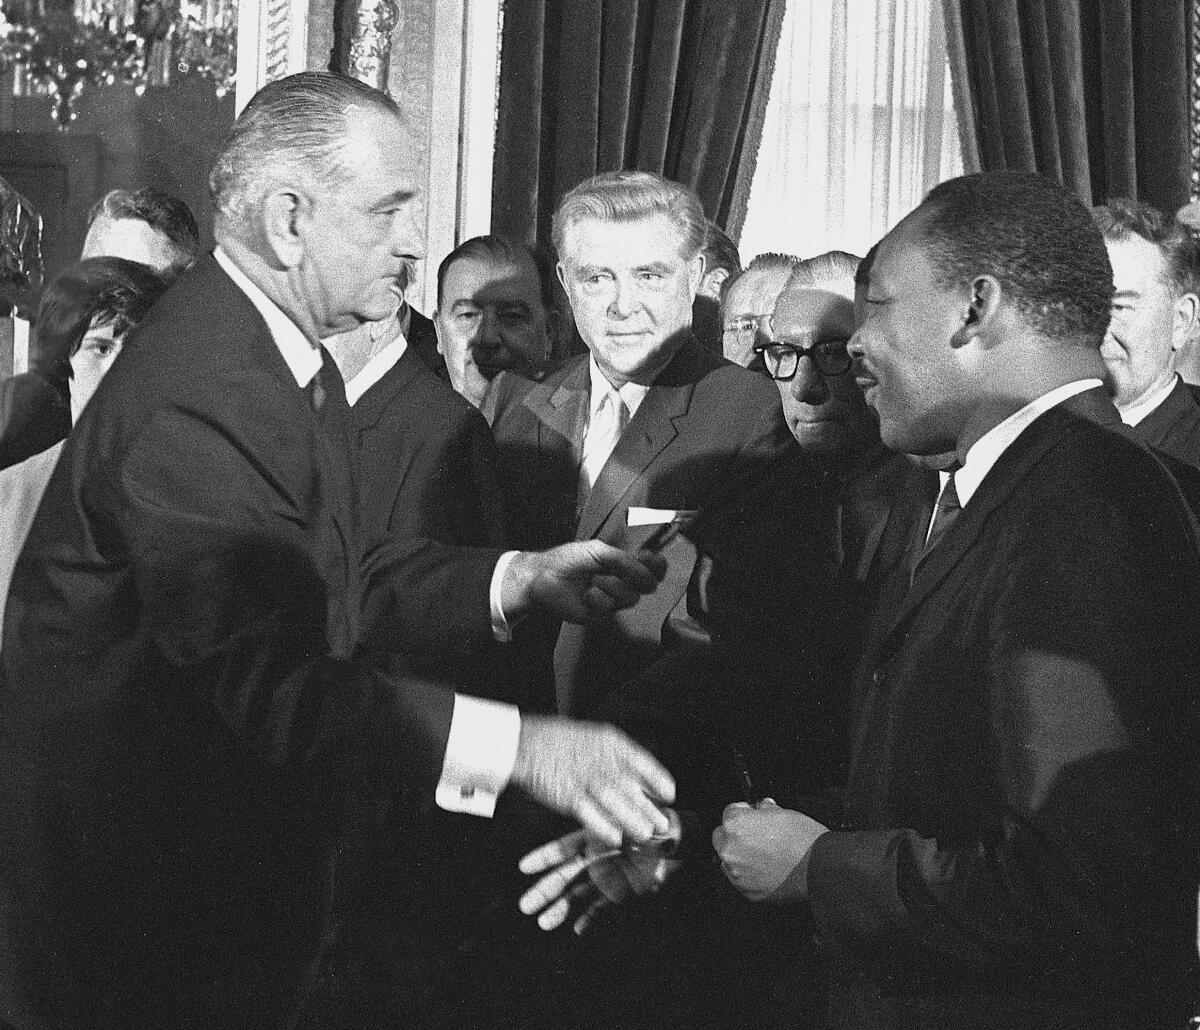 President Lyndon B. Johnson shakes hands with the Rev. Martin Luther King Jr. after signing the Voting Rights Act.